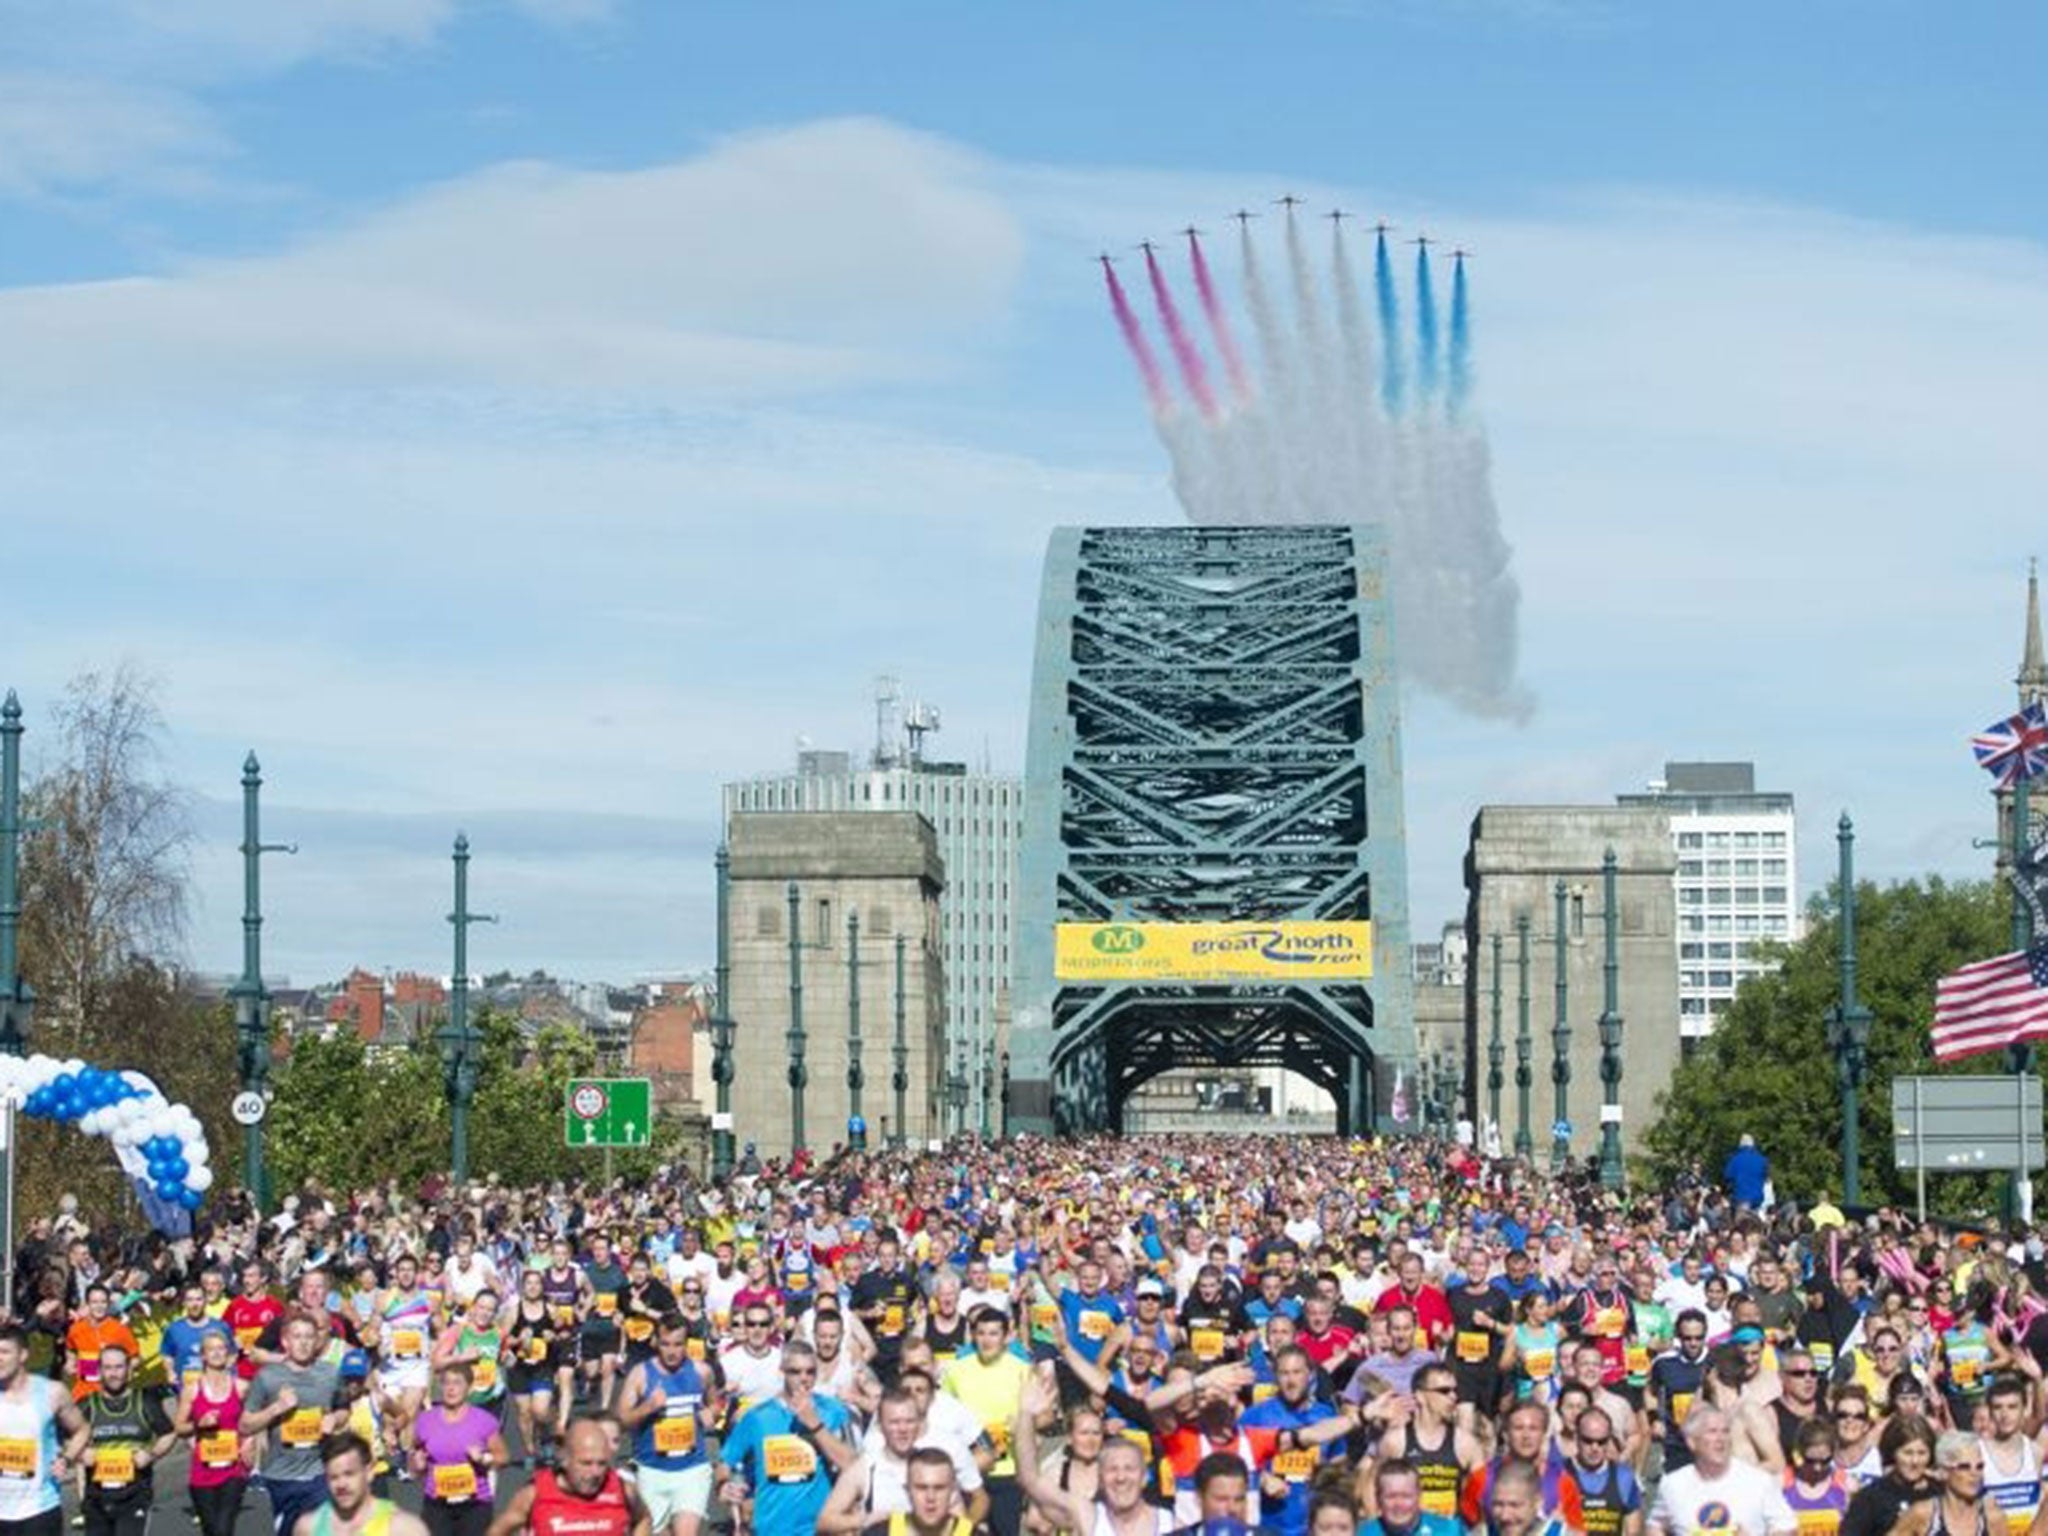 The Red Arrows are seen flying over the Tyne Bridge during the 2015 Morrisons Great North Run, Newcastle. PRESS ASSOCIATION Photo. Picture date: Sunday September 13, 2015.